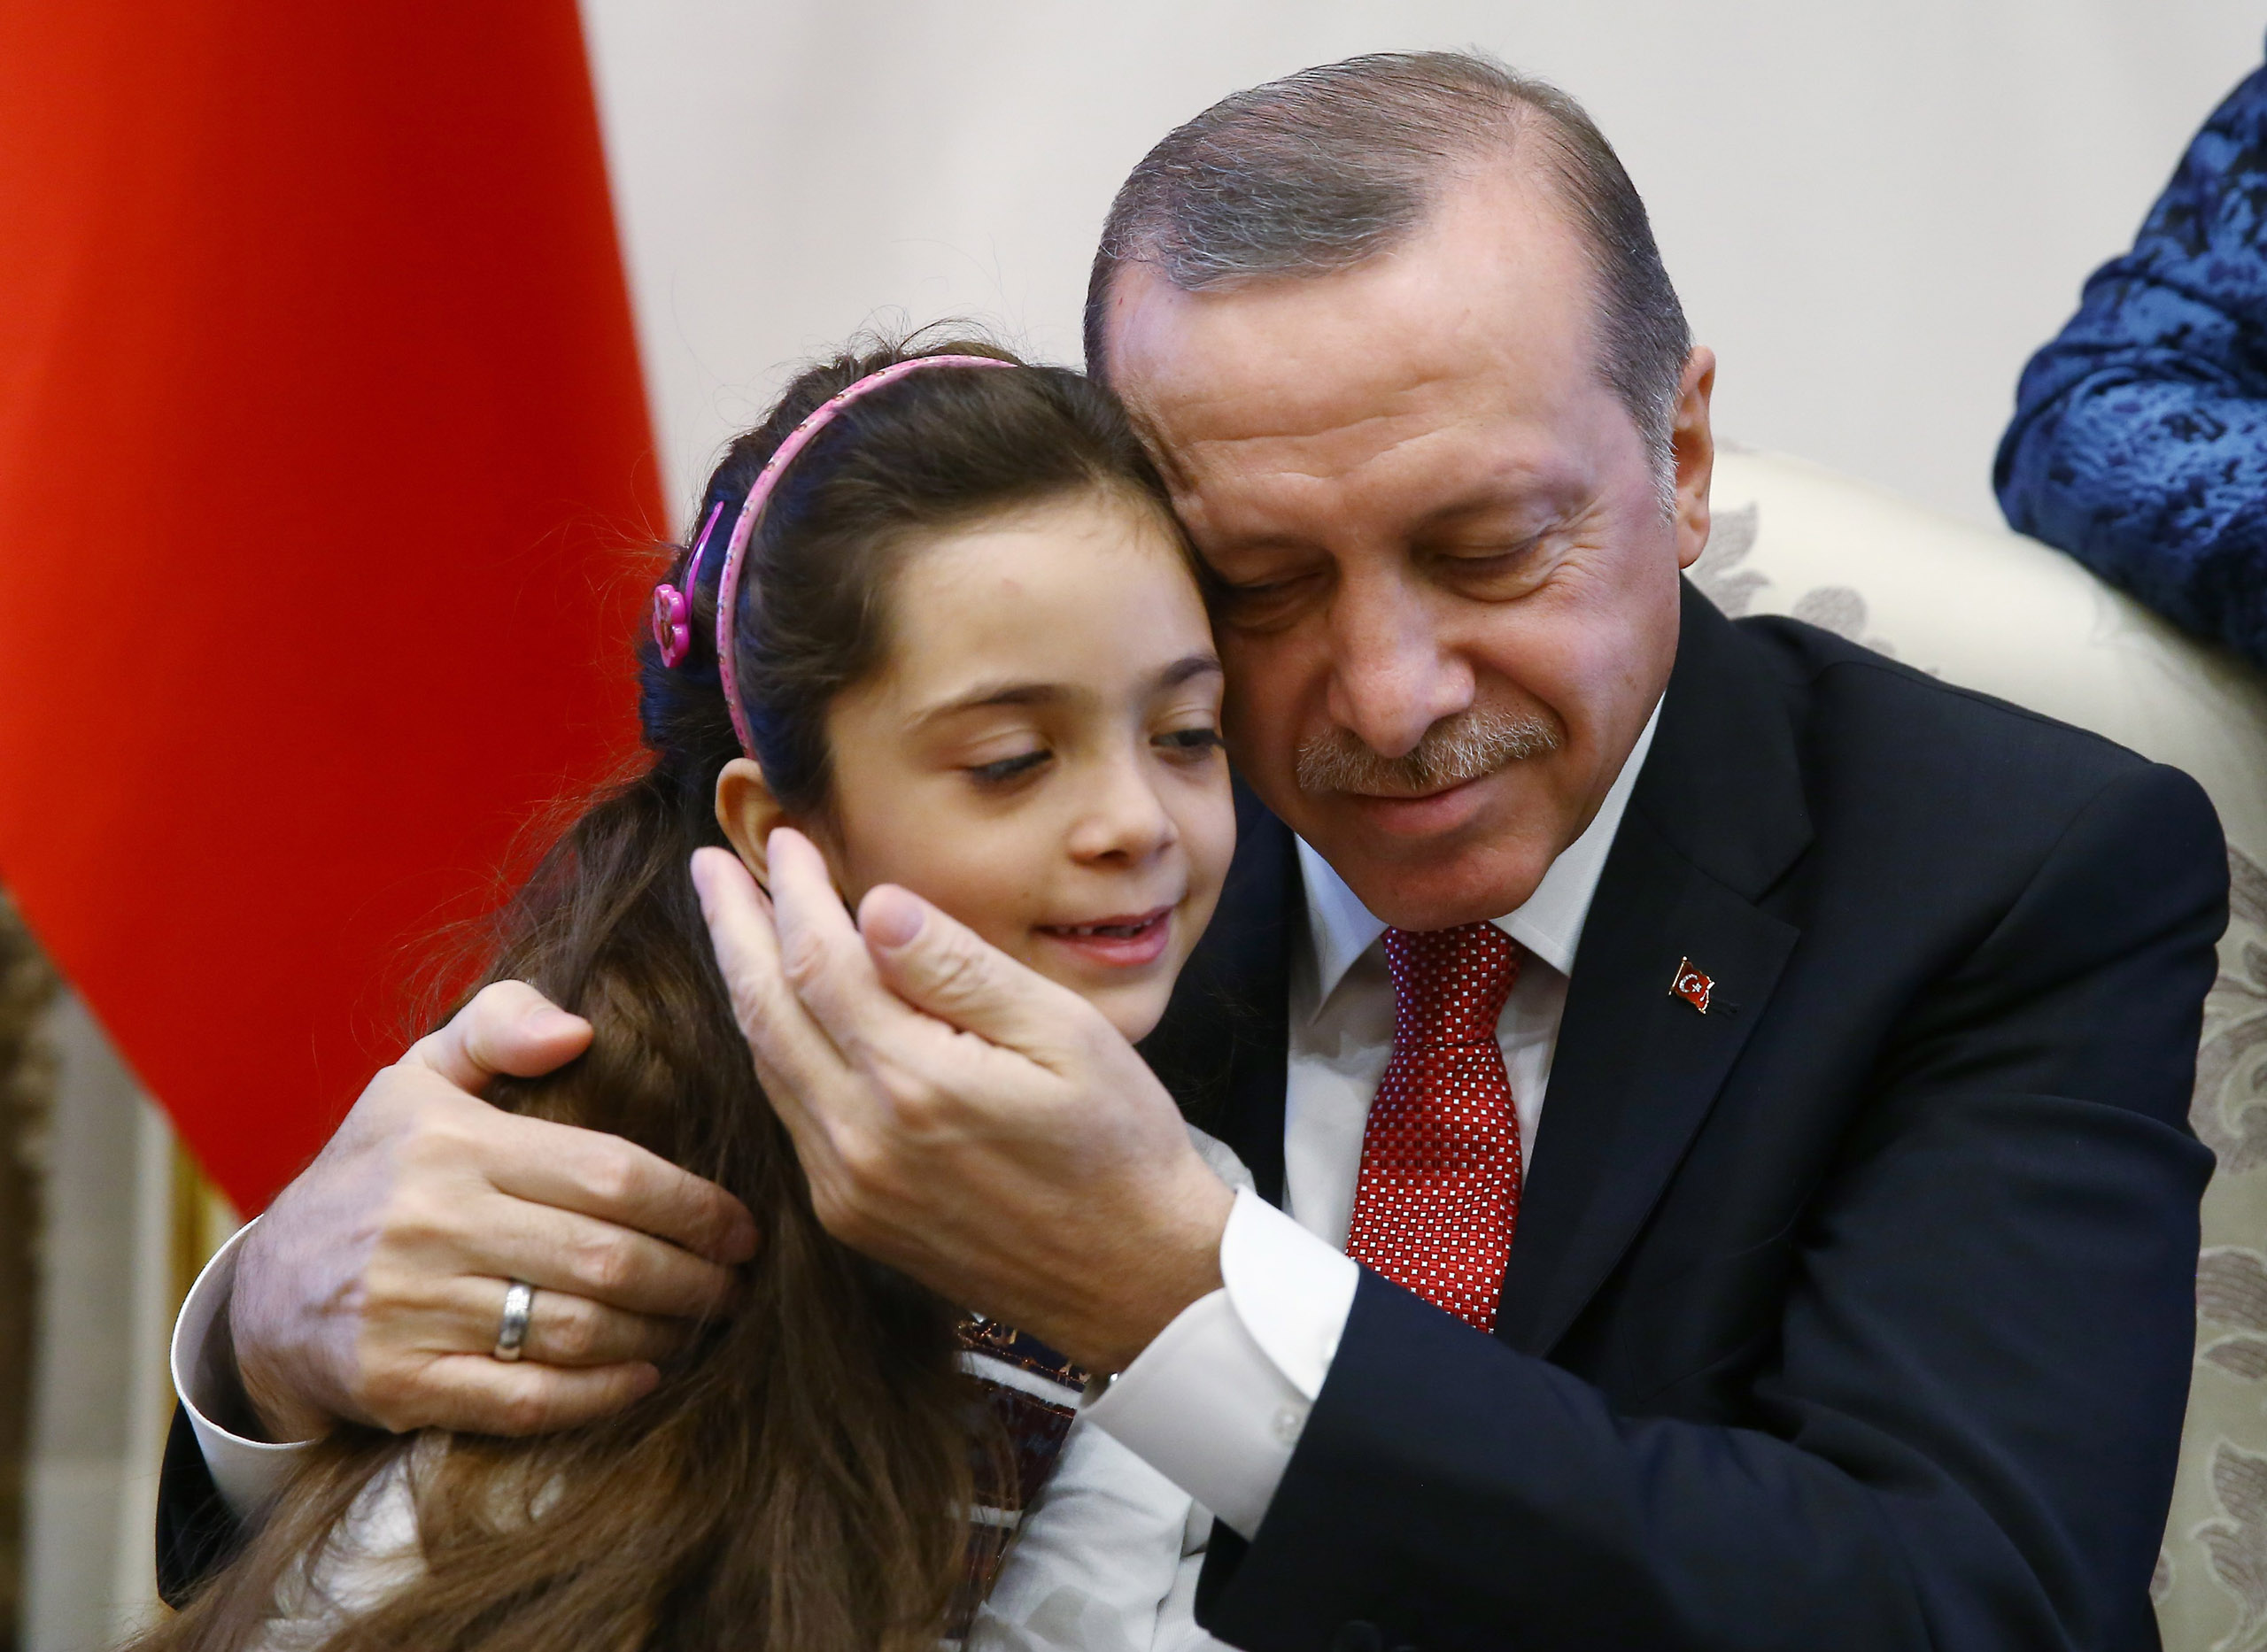 Turkish President Erdogan meets Bana Alabed evacuated from E. Aleppo